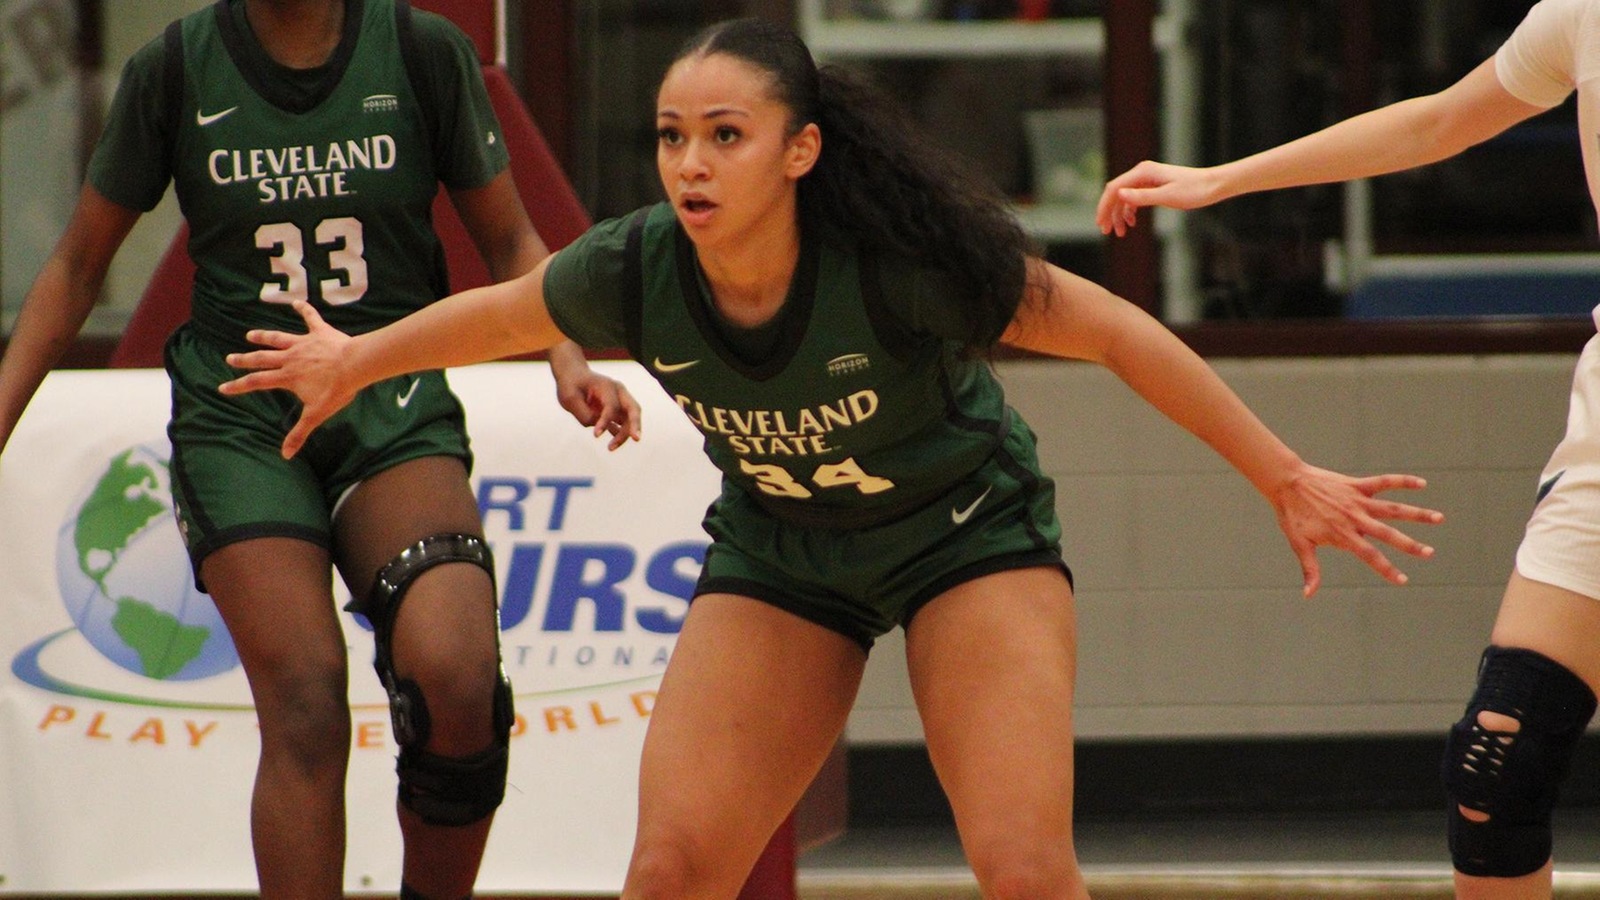 Cleveland State Women’s Basketball Advances To WBI Championship With 58-50 Semifinal Victory Over Nevada